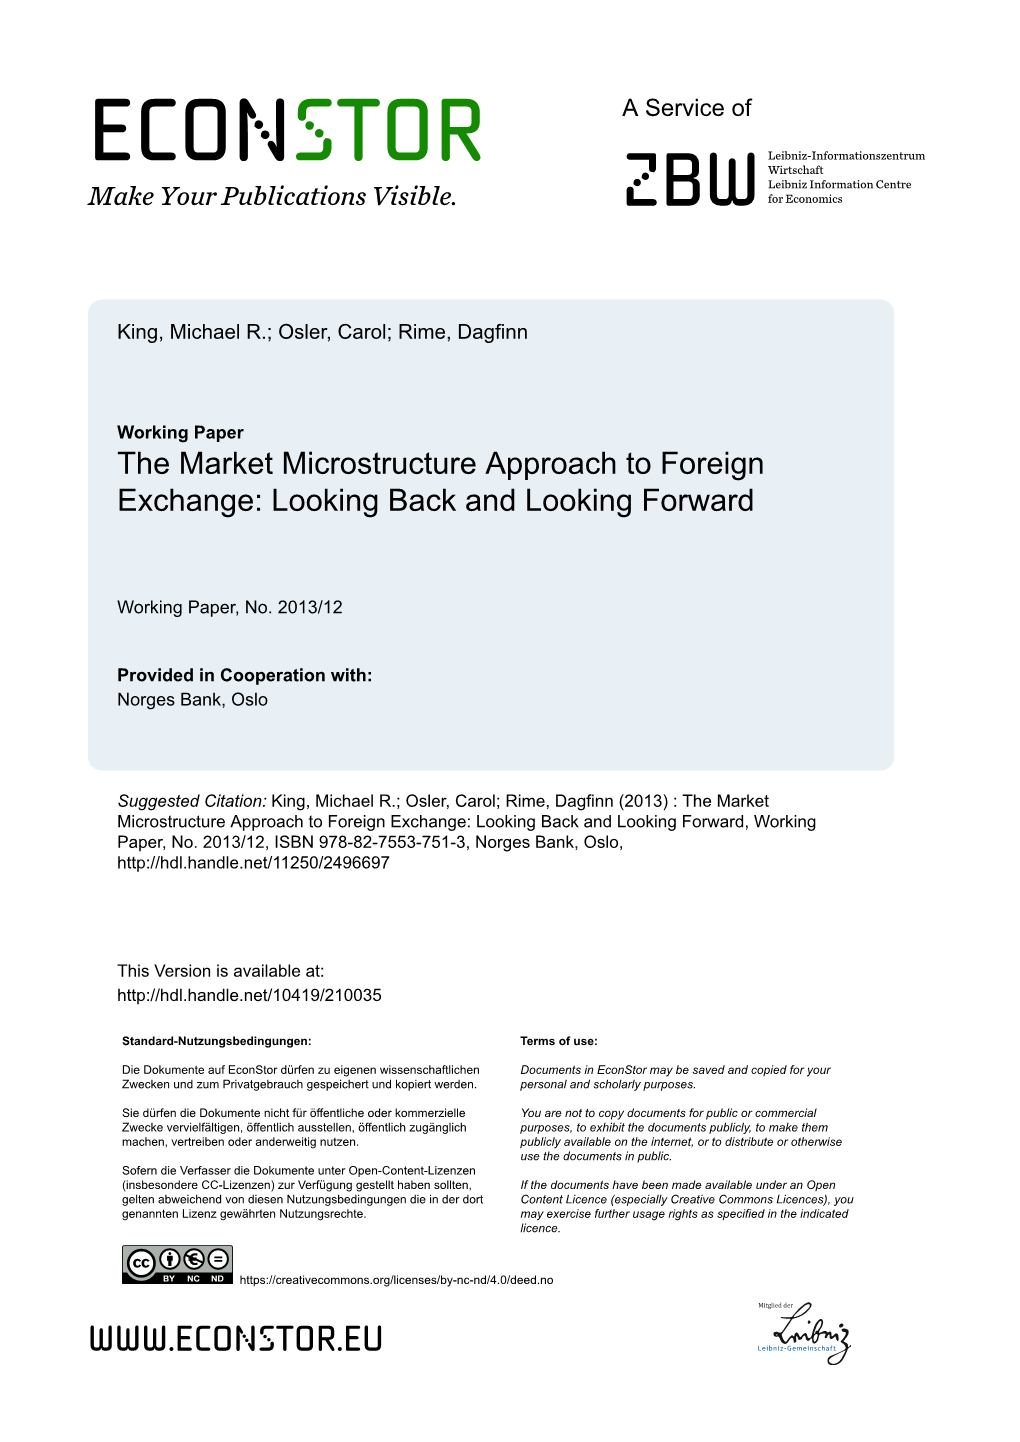 The Market Microstructure Approach to Foreign Exchange: Looking Back and Looking Forward